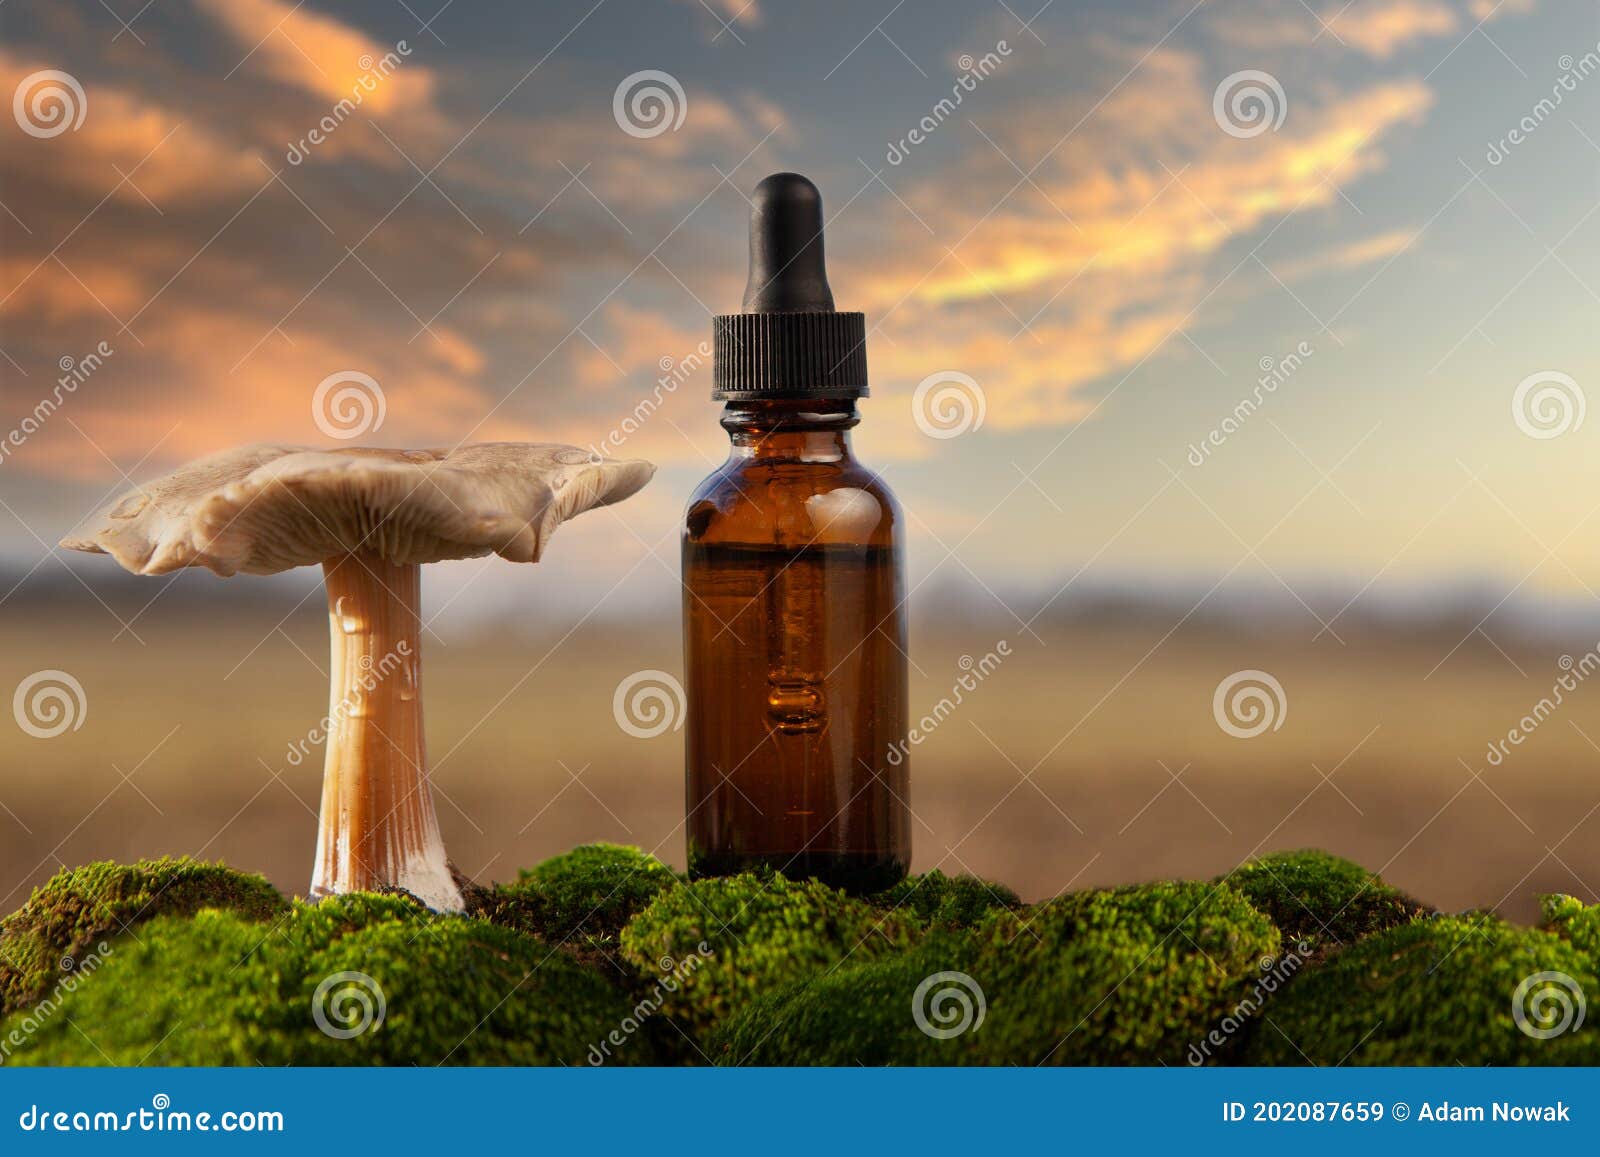 medicinal mushroom extract or psychedelic mushrooms. concept